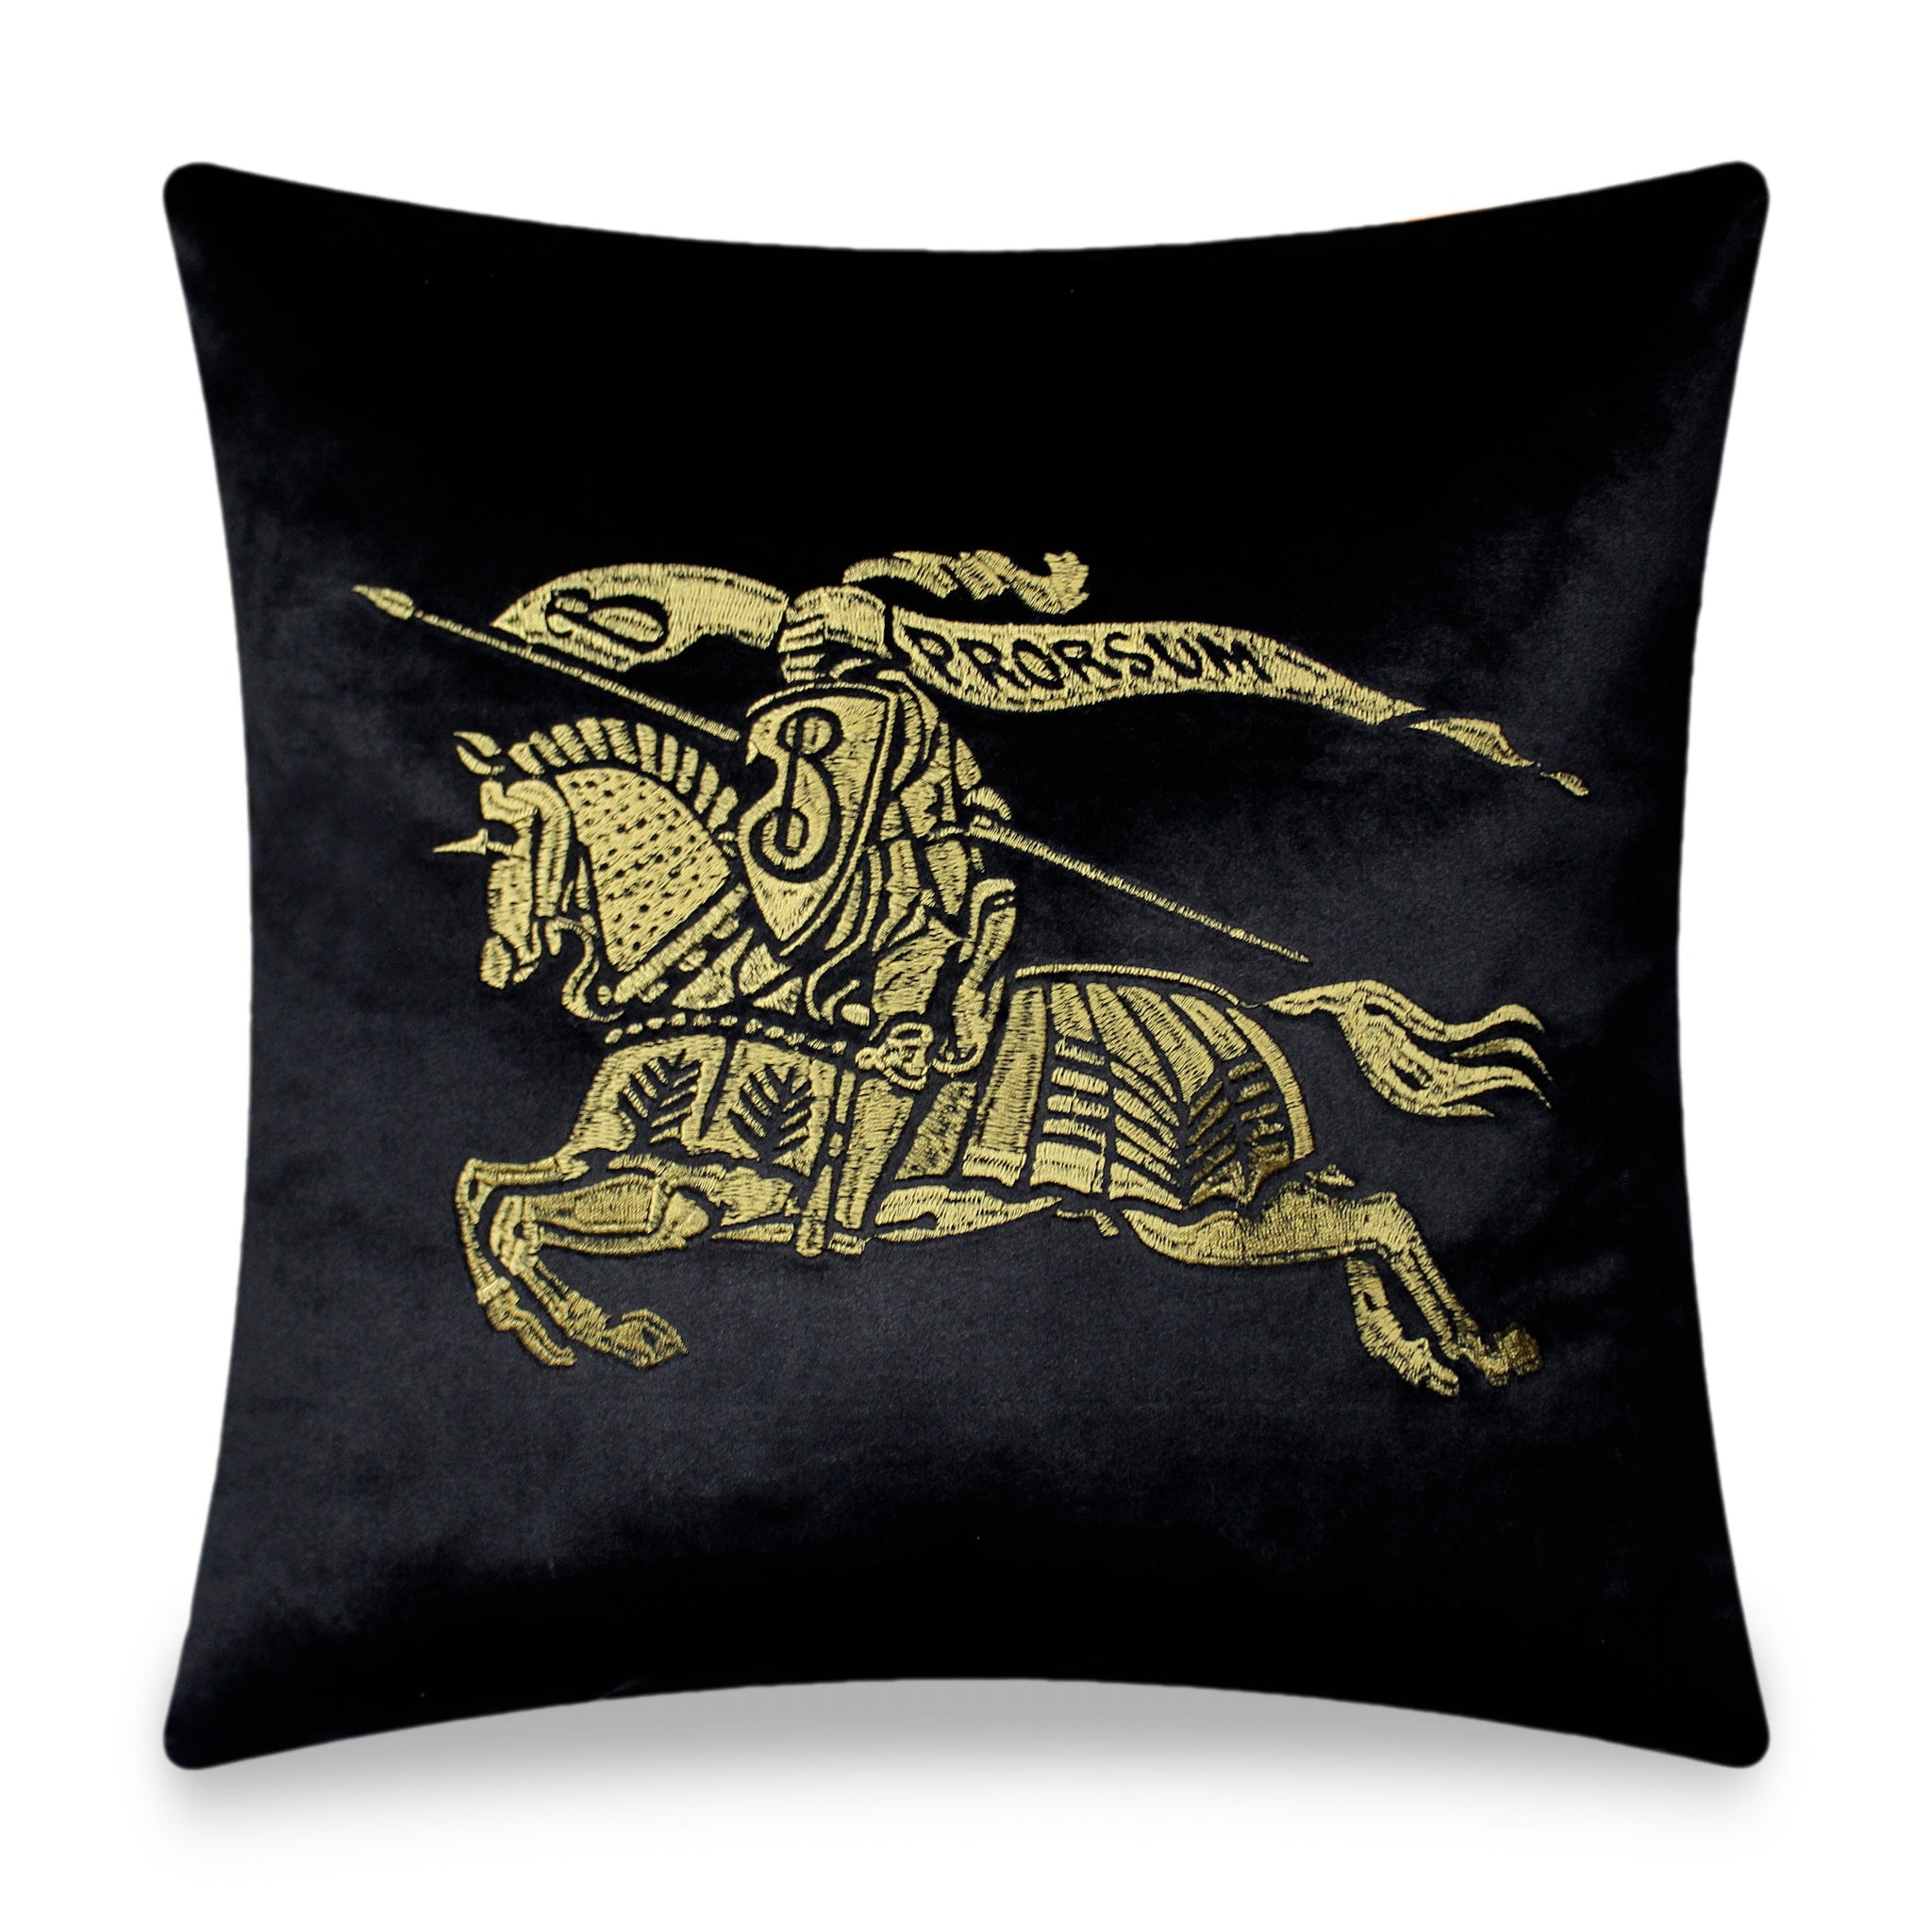 Black Pillow Cover Velvet Decorative Cushion Cover Embroidery  Iconic Horse Throw Pillow Pillow Case for Sofa Chair Bedroom Living Room 45x45 cm 18x18 Inches